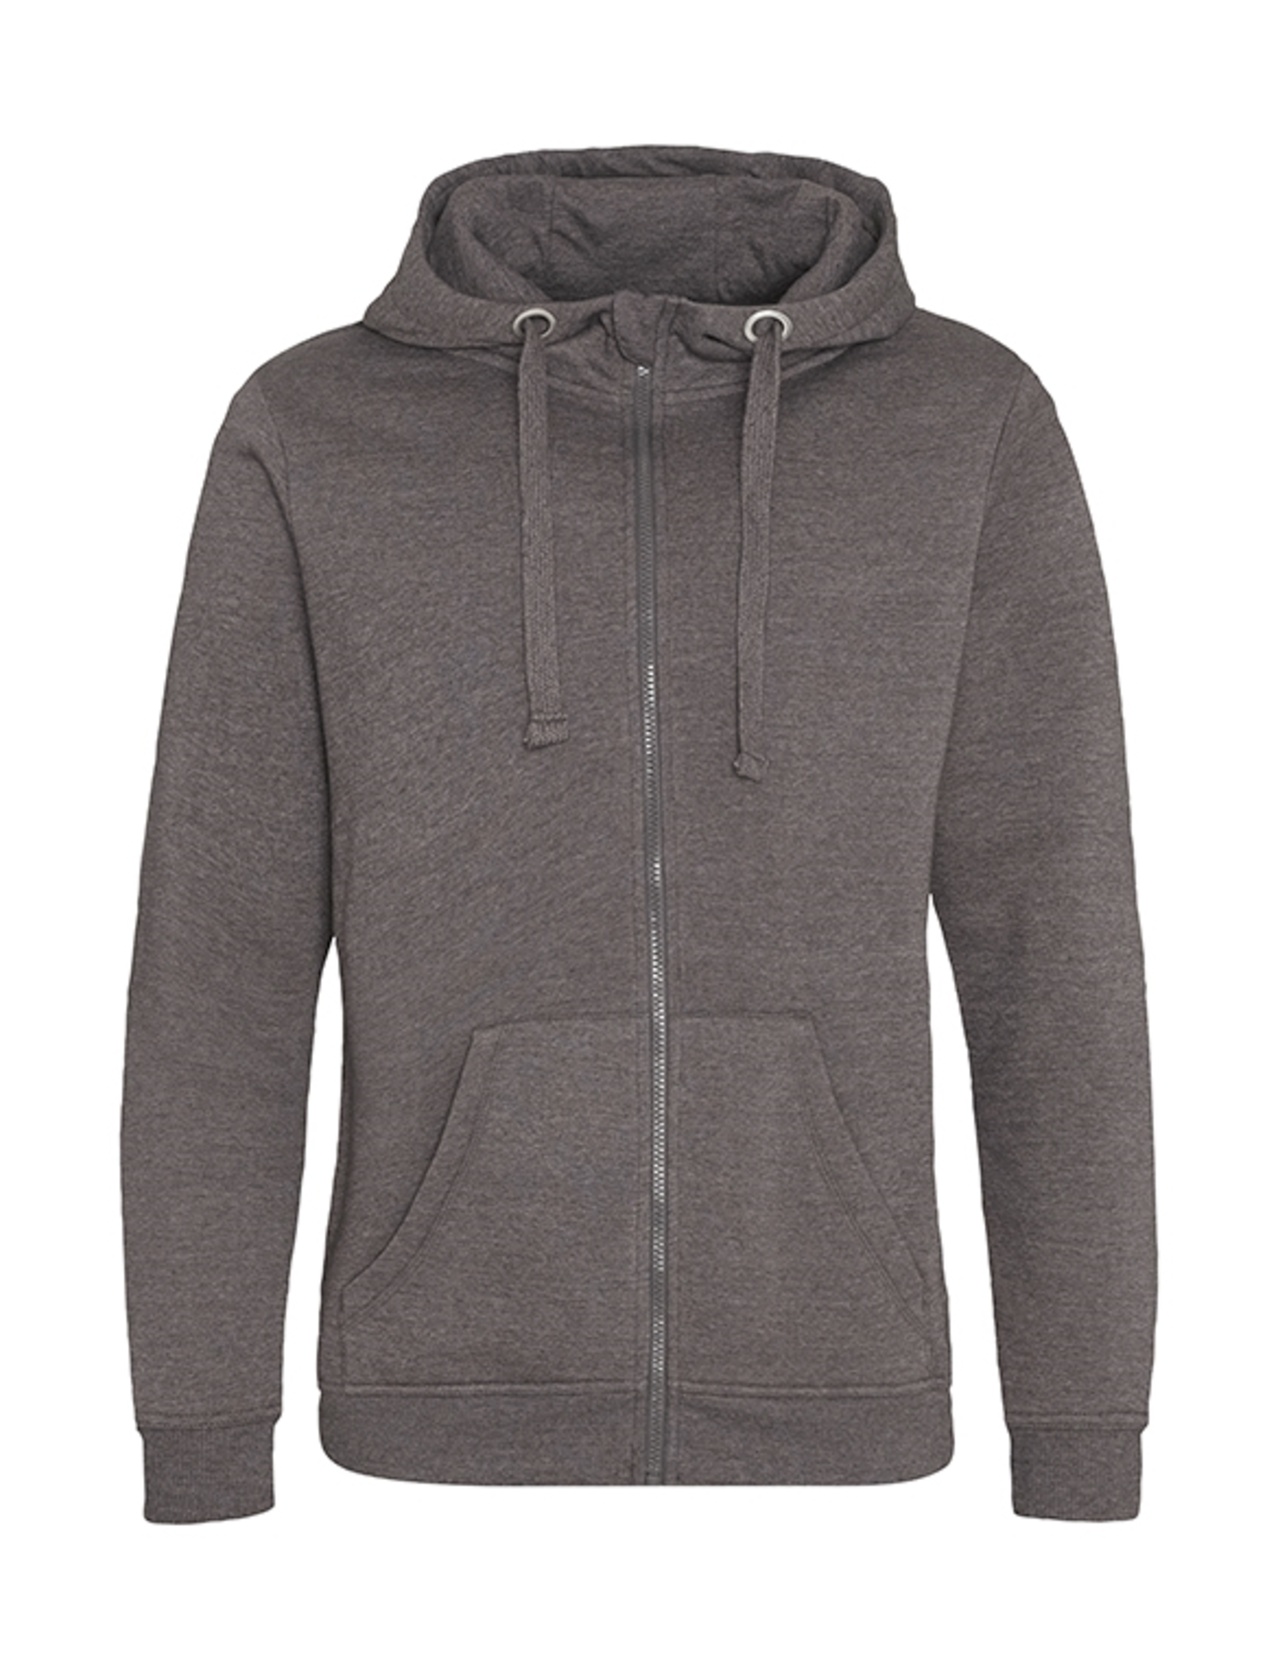 Just Hoods Graduate Heavyweight Zoodie - Charcoal - S